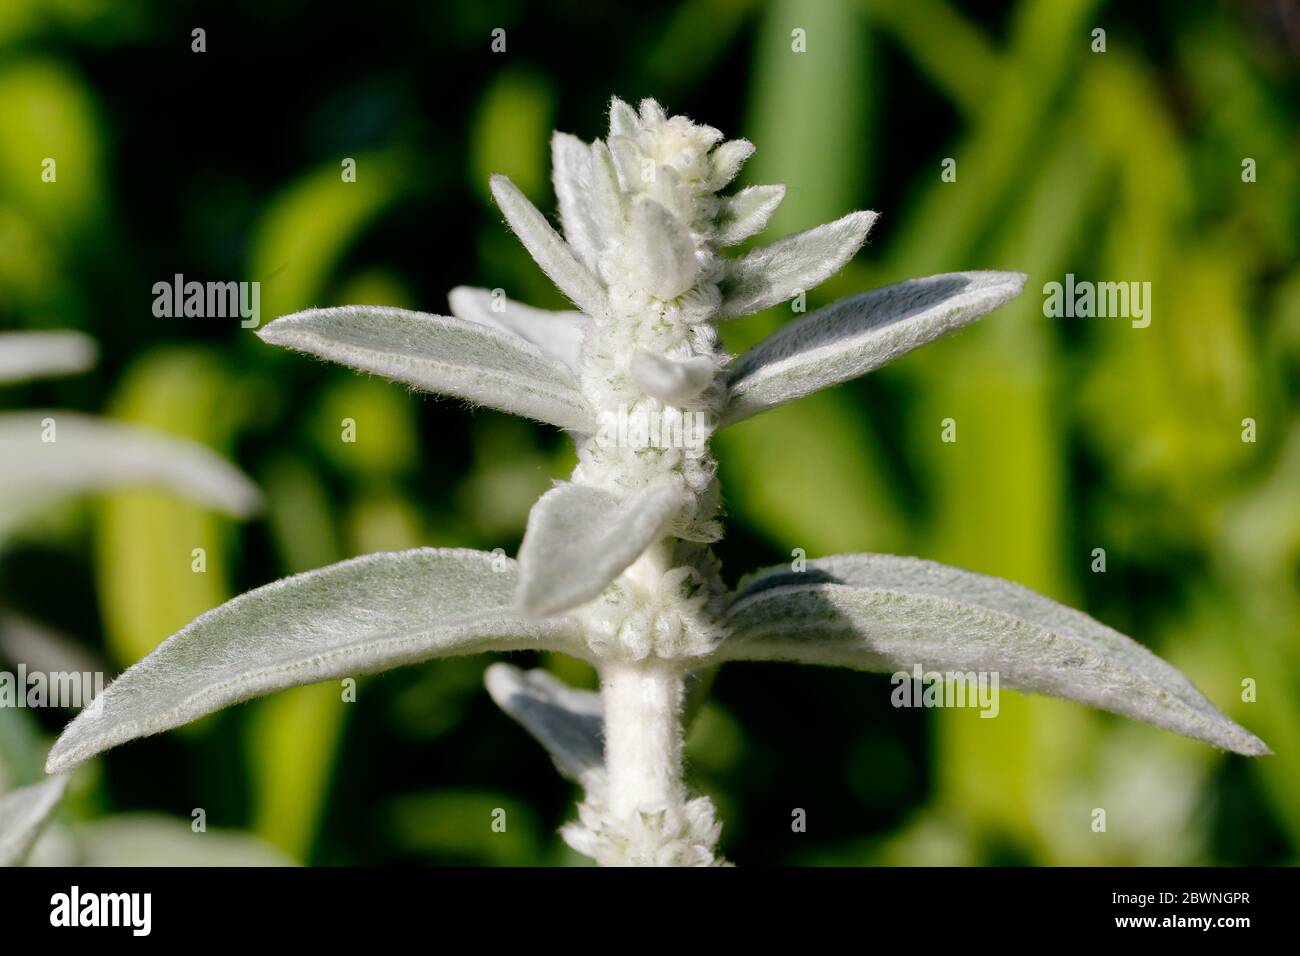 The fuzzy leaves of a Lamb's Ear (Stachys byzantina) plant prior to blooming Stock Photo